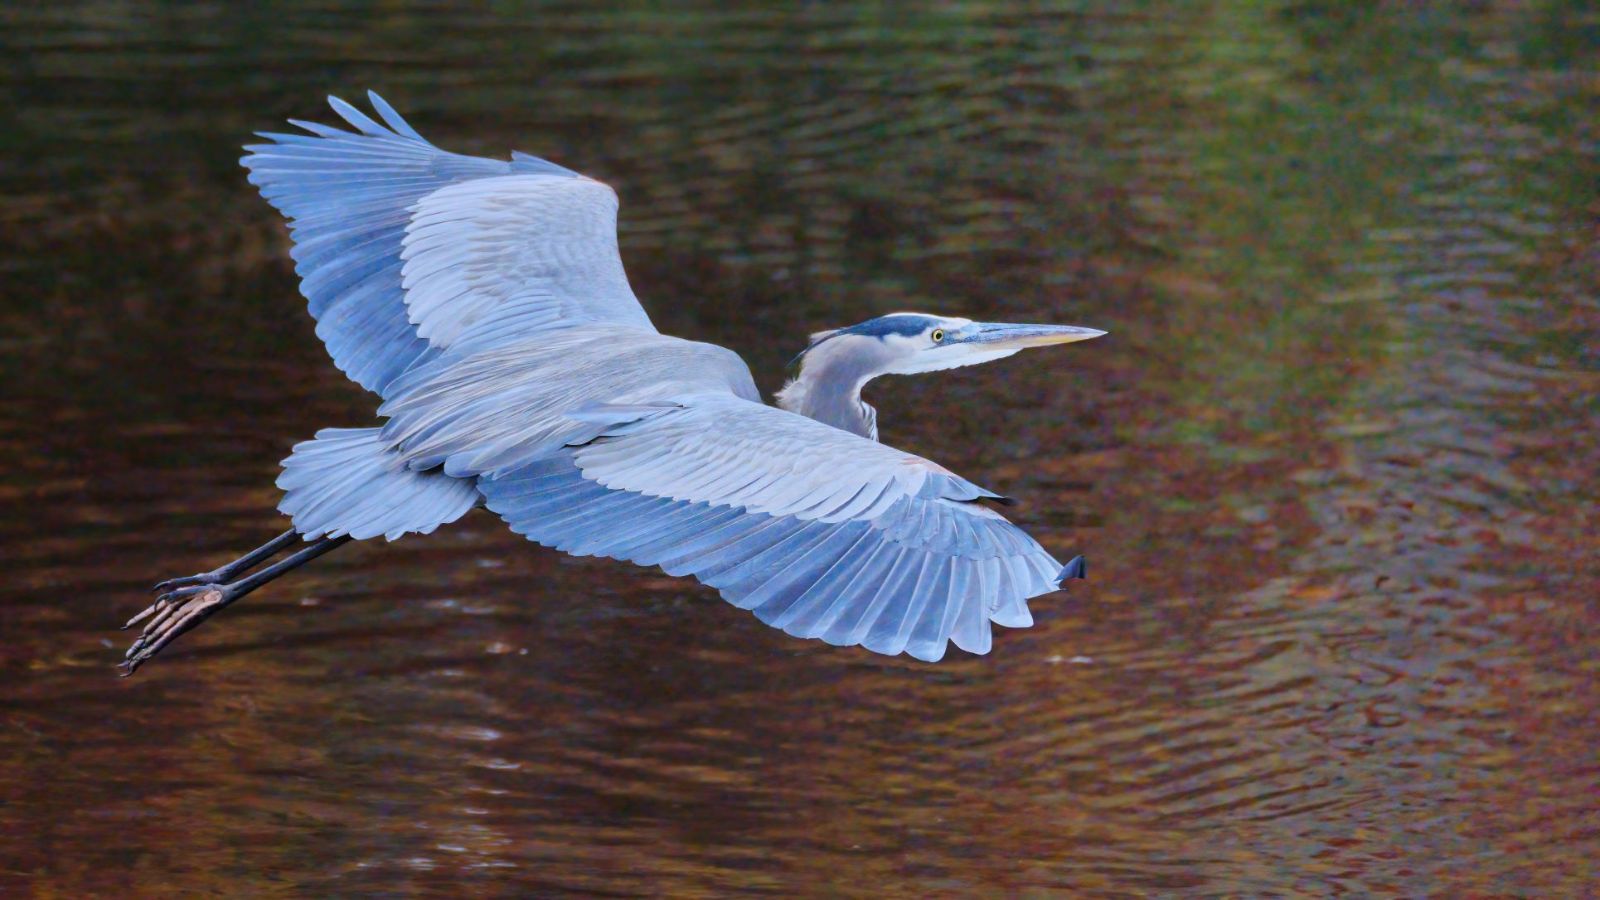 Photo: A Great Blue Heron flies over the water. Credit: Veit/CC BY-ND 2.0